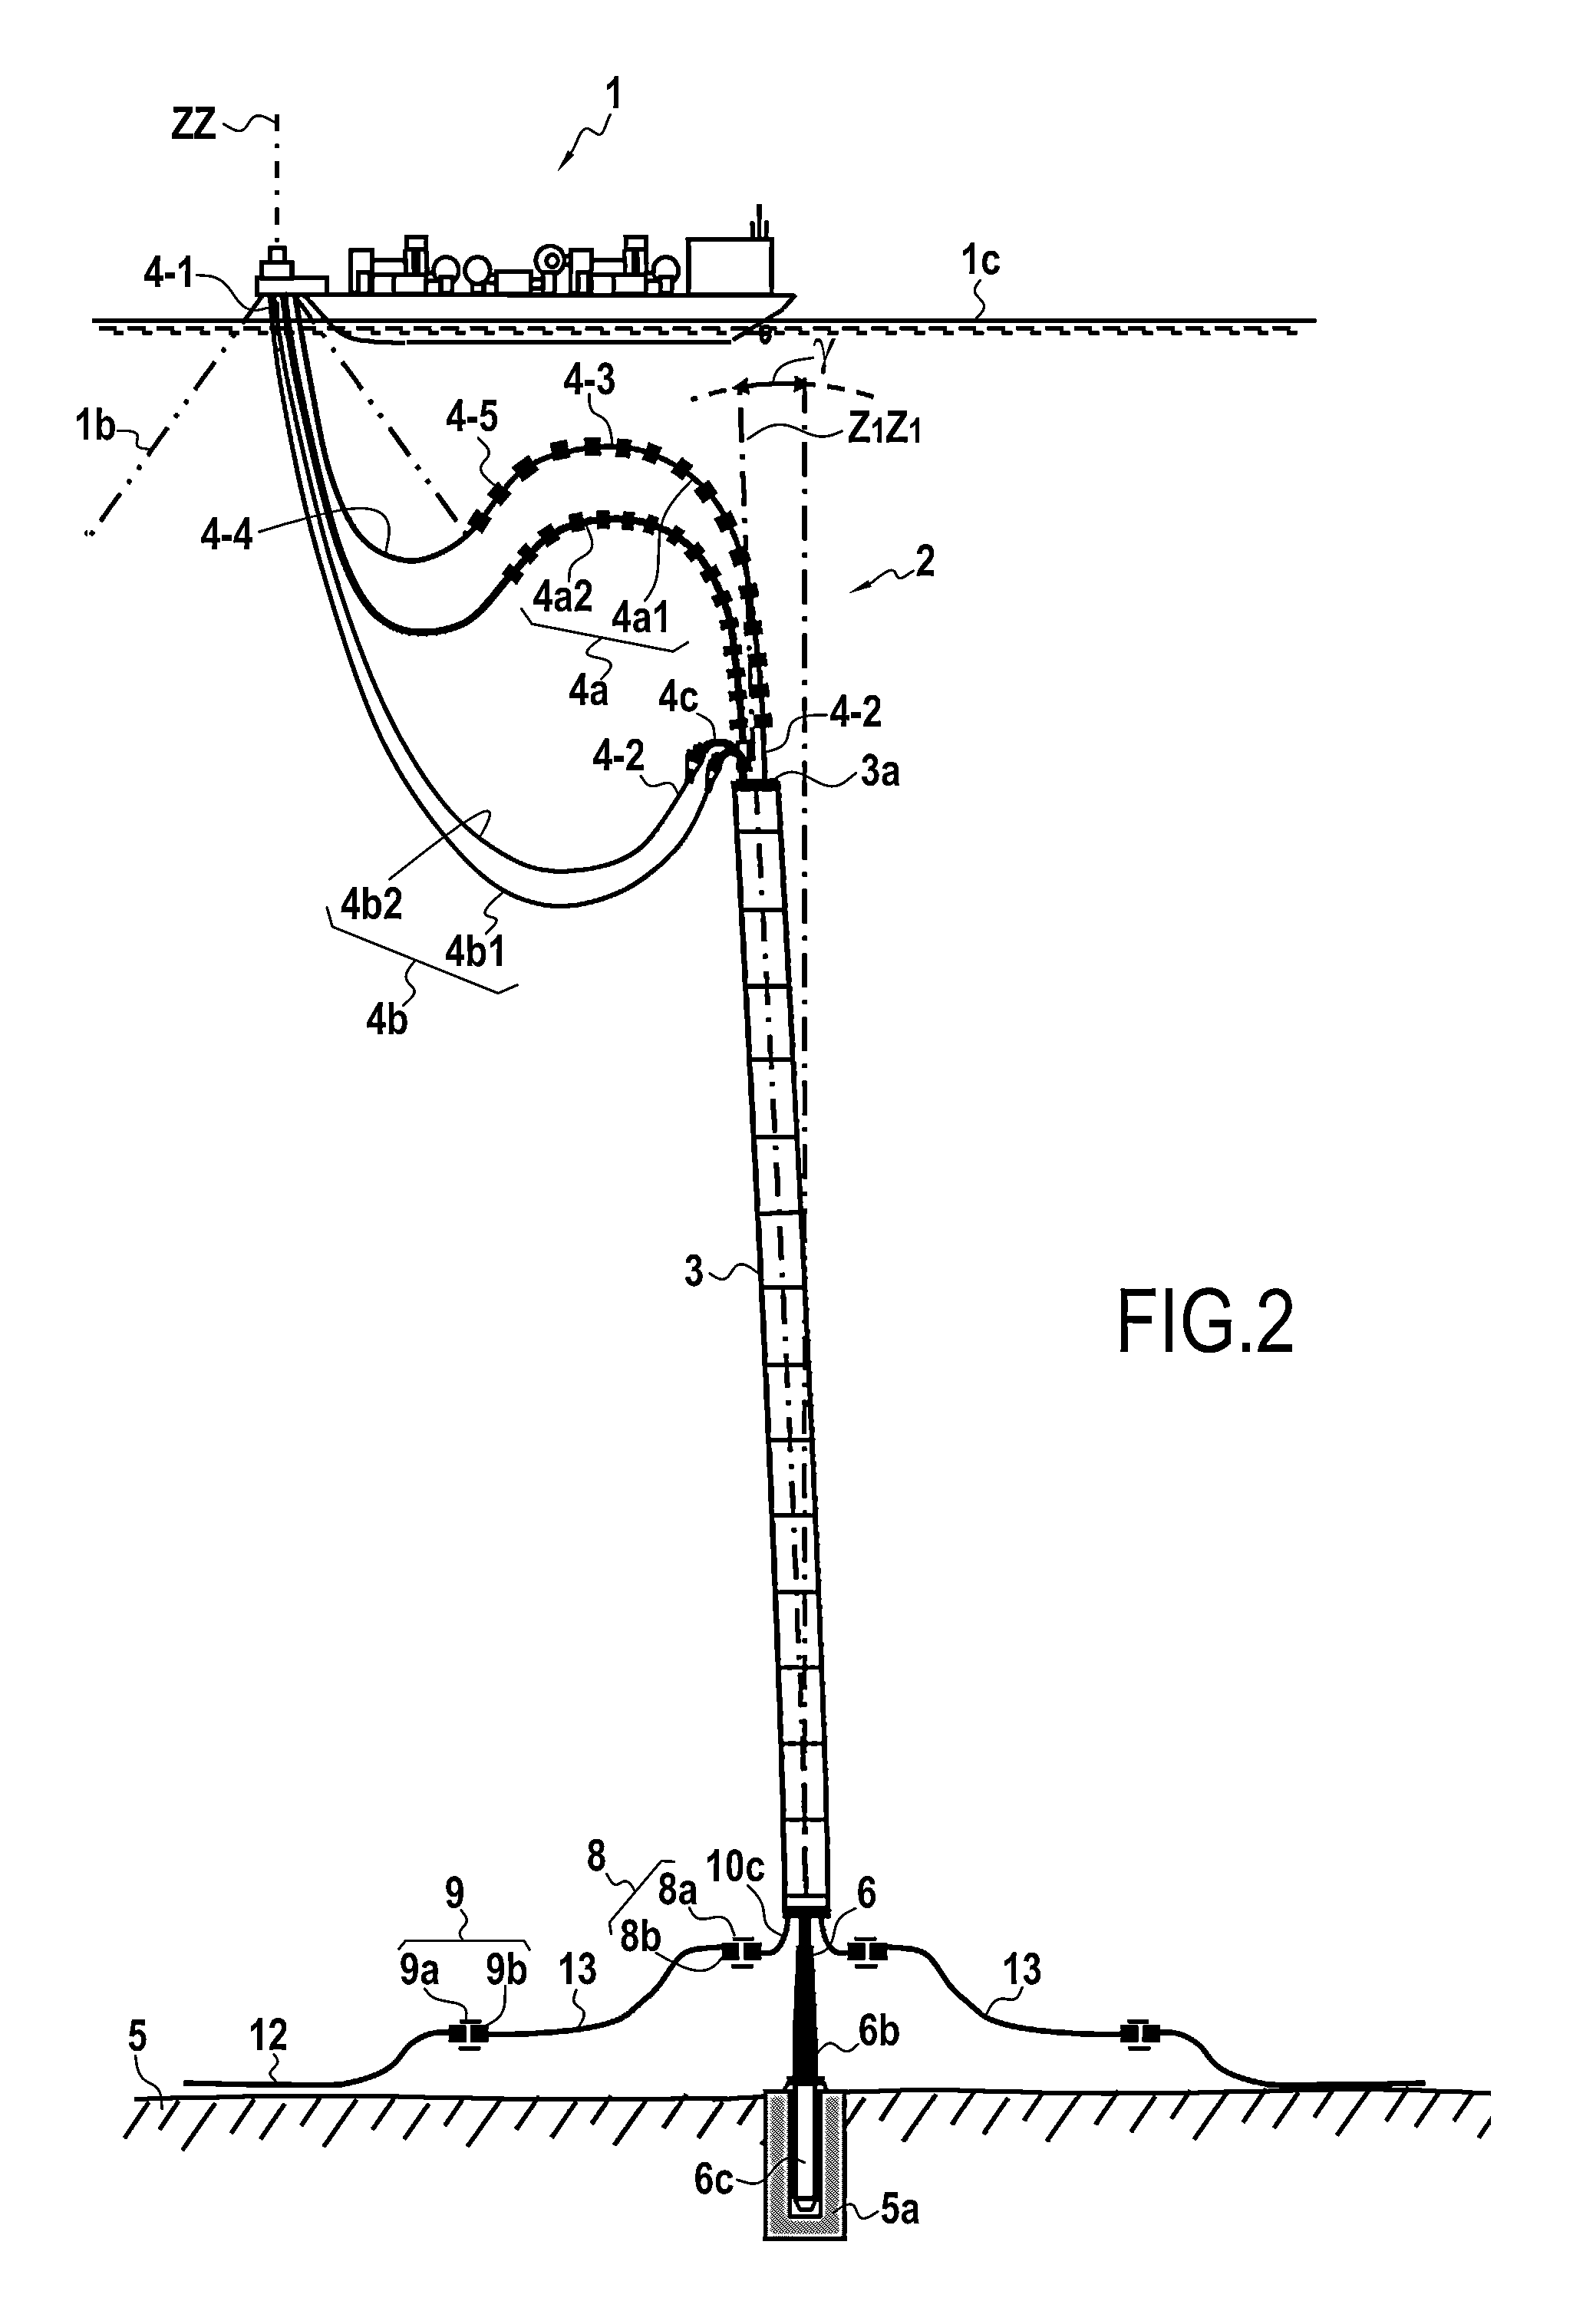 Installation comprising seabed-to-surface connections of the multi-riser hybrid tower type, including positive-buoyancy flexible pipes